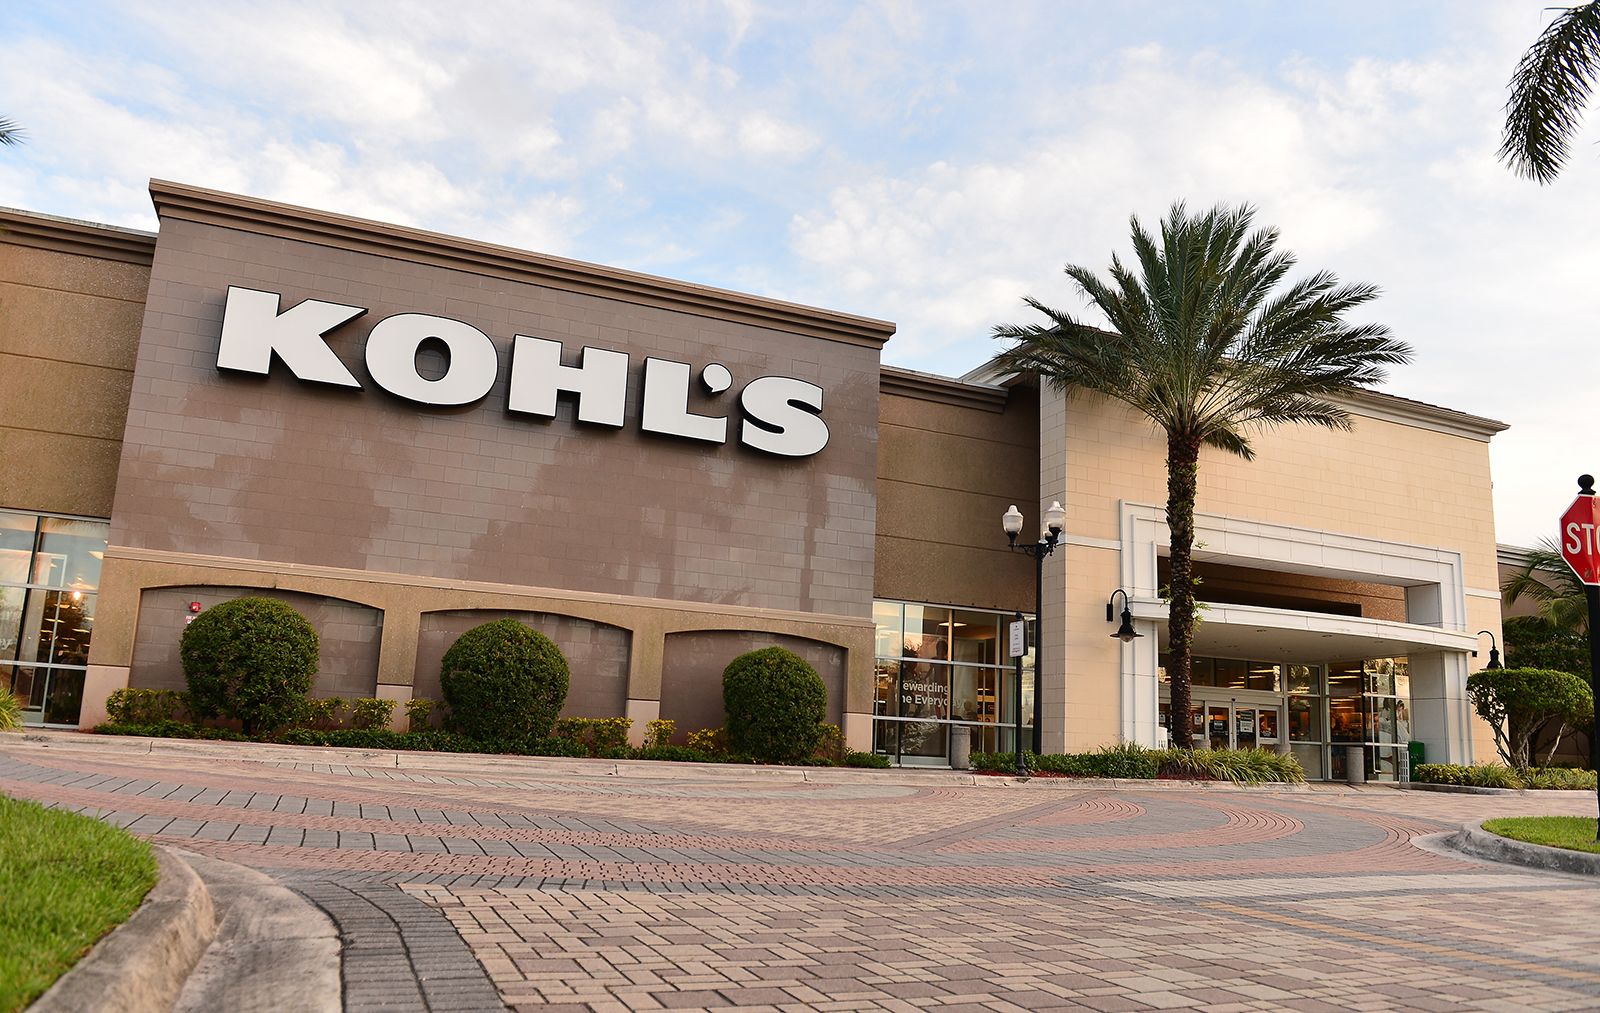 Kohl's Is Said to Field Takeover Interest From Two Suitors - Bloomberg